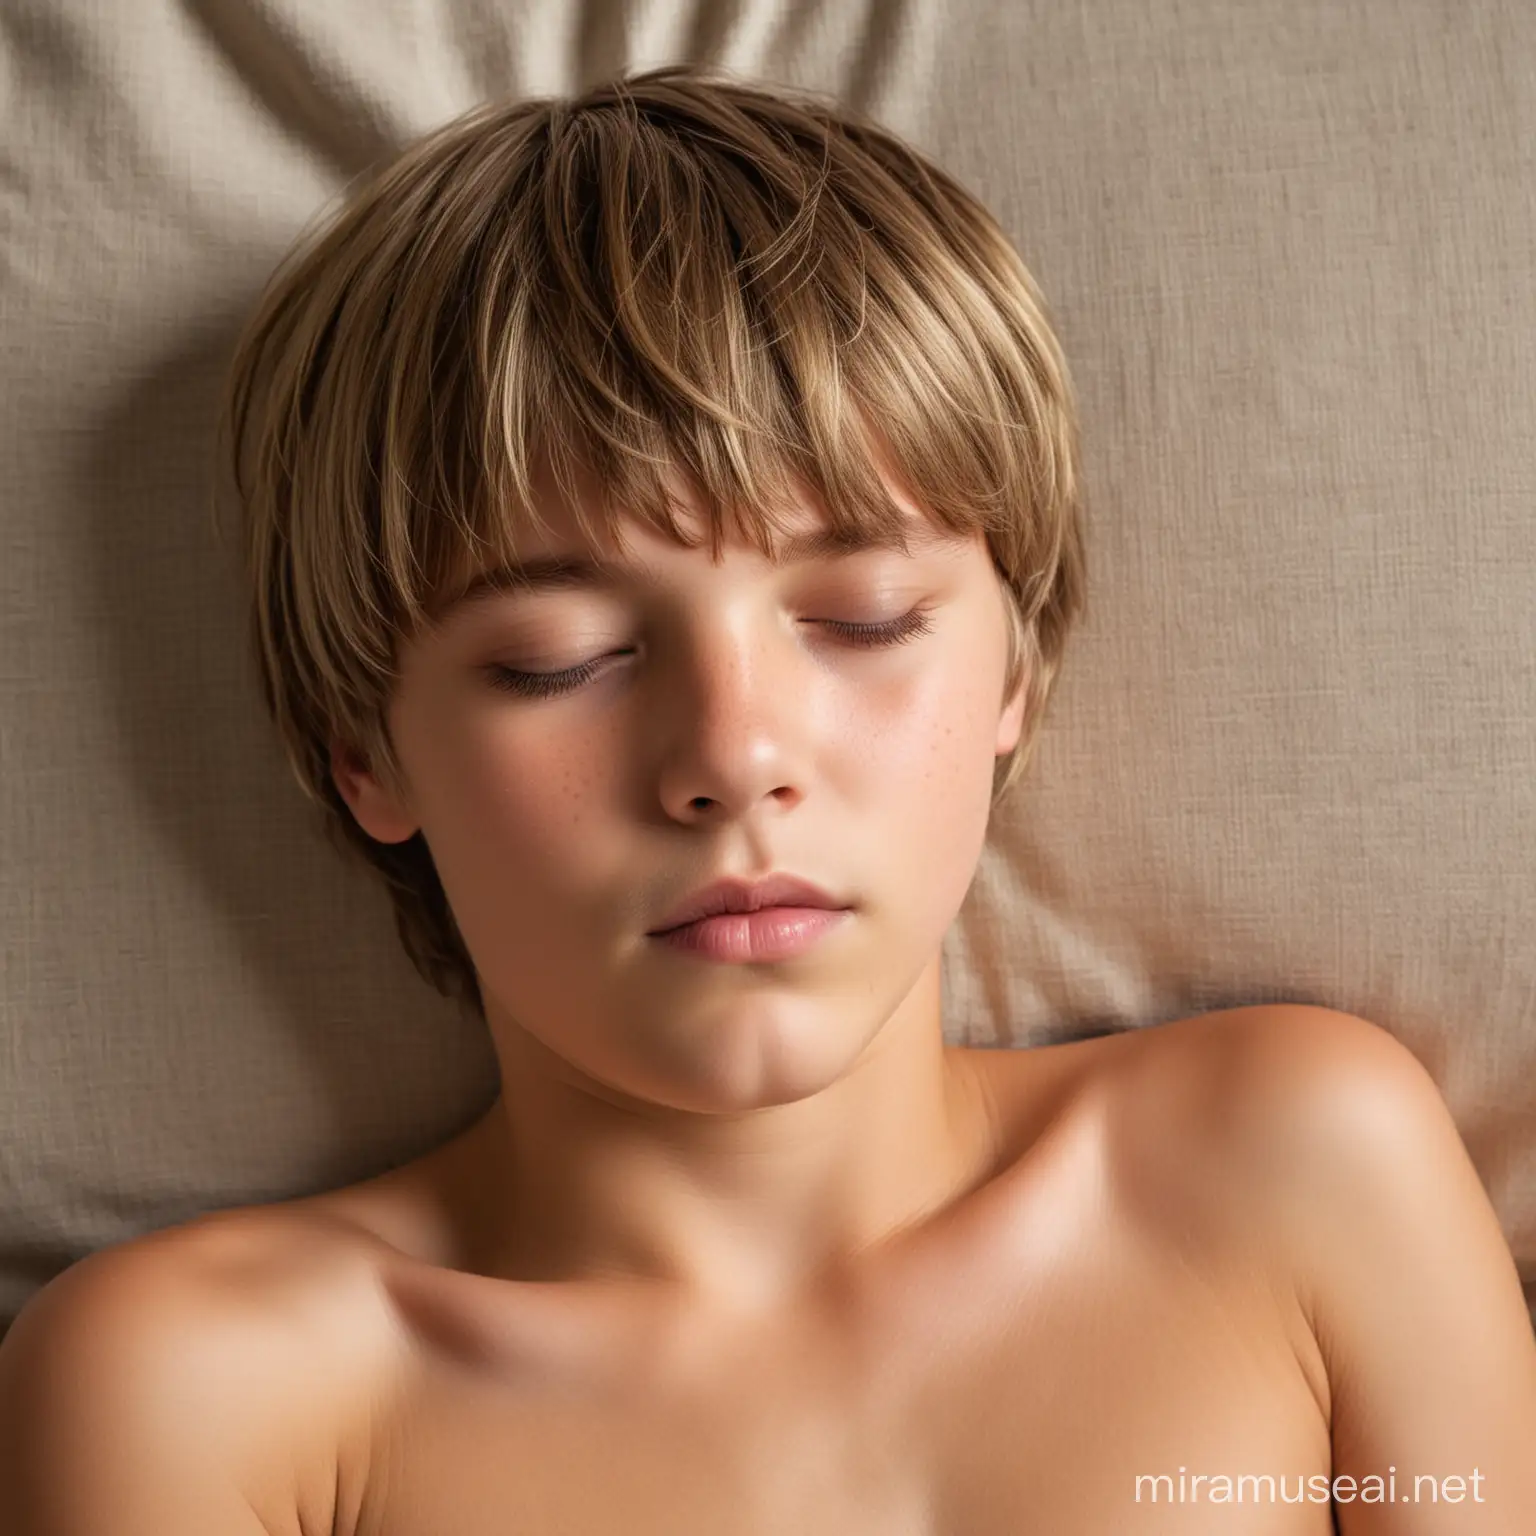 Adorable Young Boy with Bowl Cut Sleeping Peacefully in Gentle Light